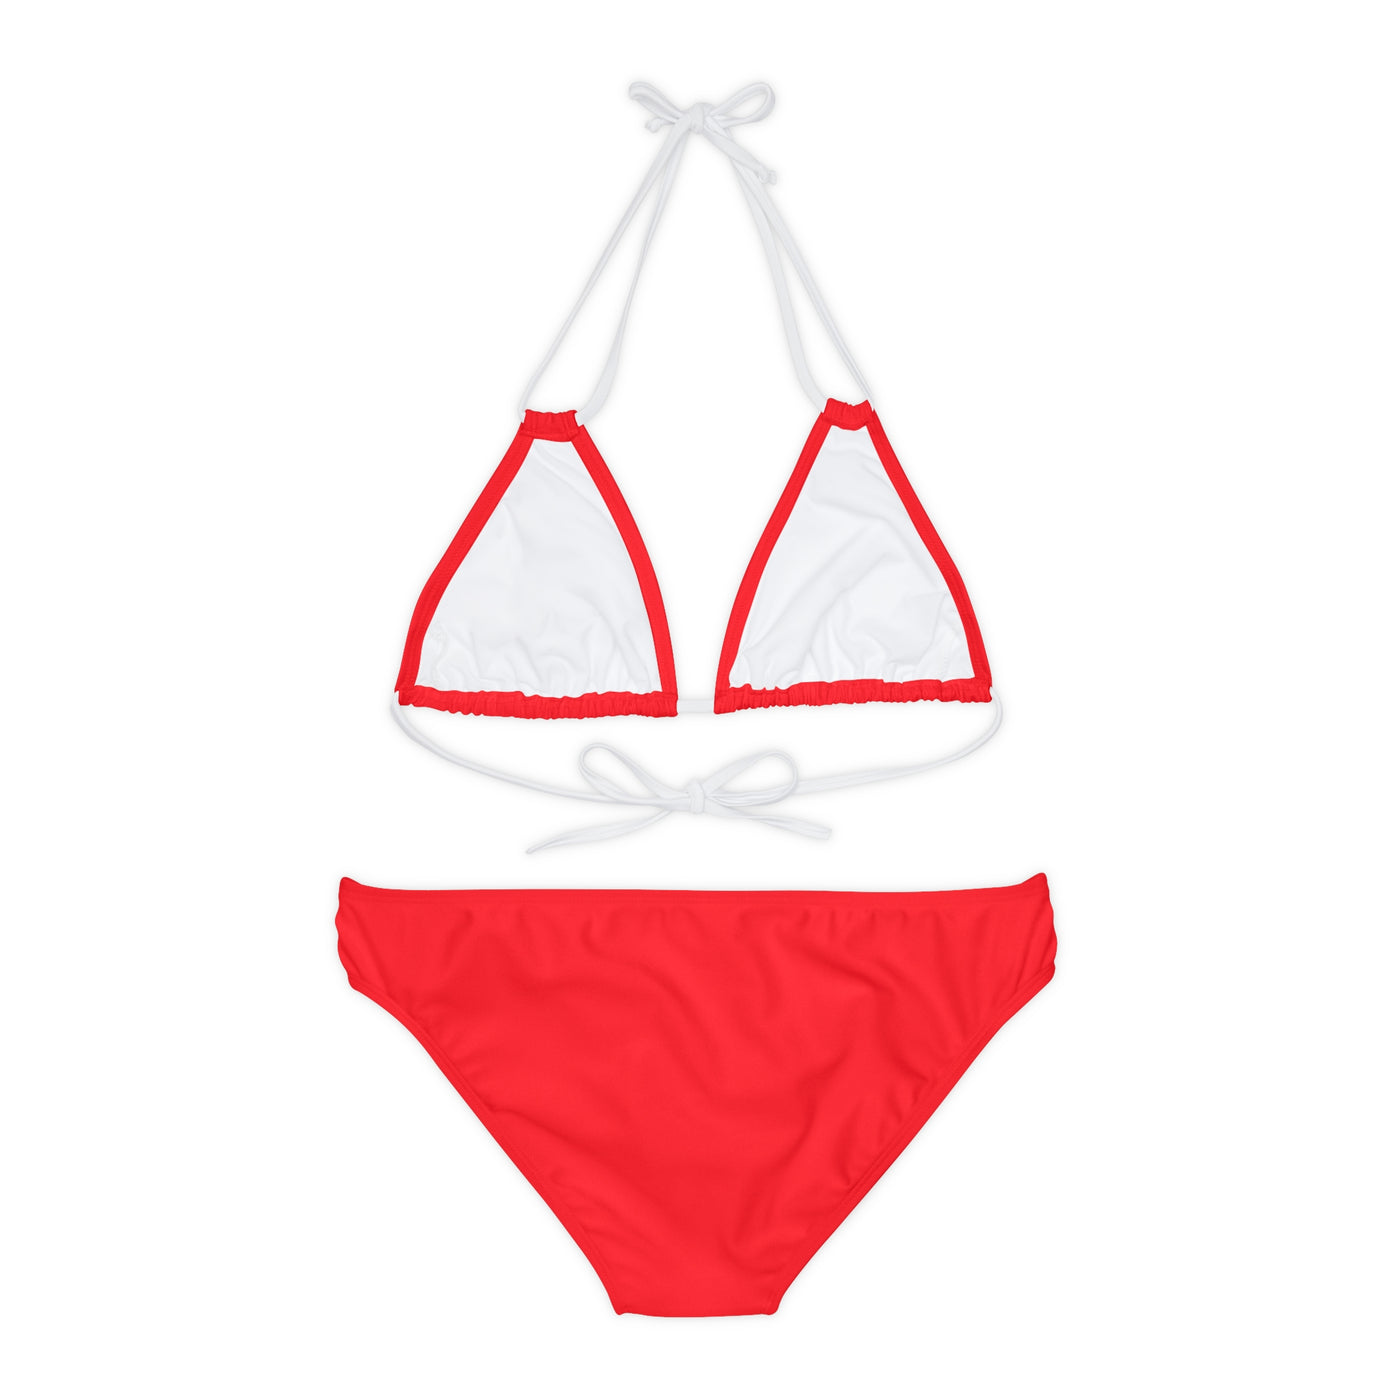 X Style Strappy Bikini Set in Red - NoCeilingsClothing